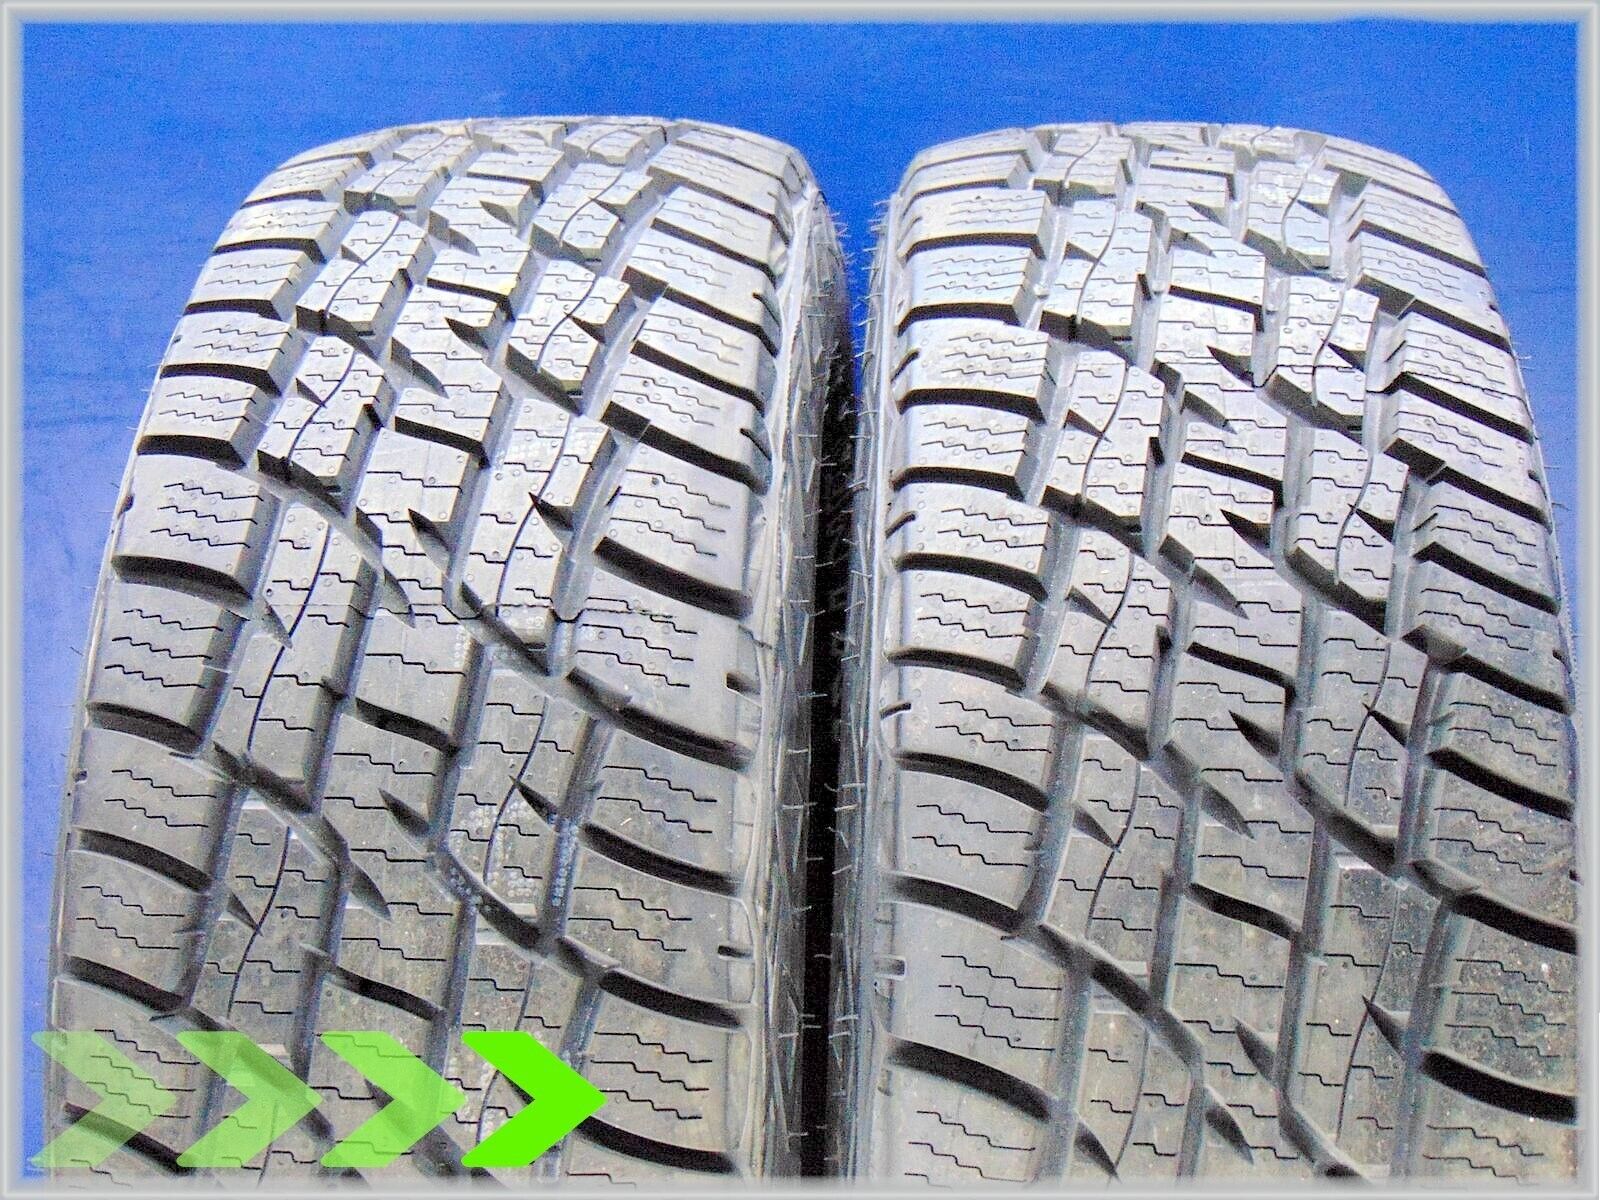 SET OF 2 BRAND NEW 245/70/16 WILD COUNTRY XTX SPORT 4S WINTER TIRES 107T 2457016